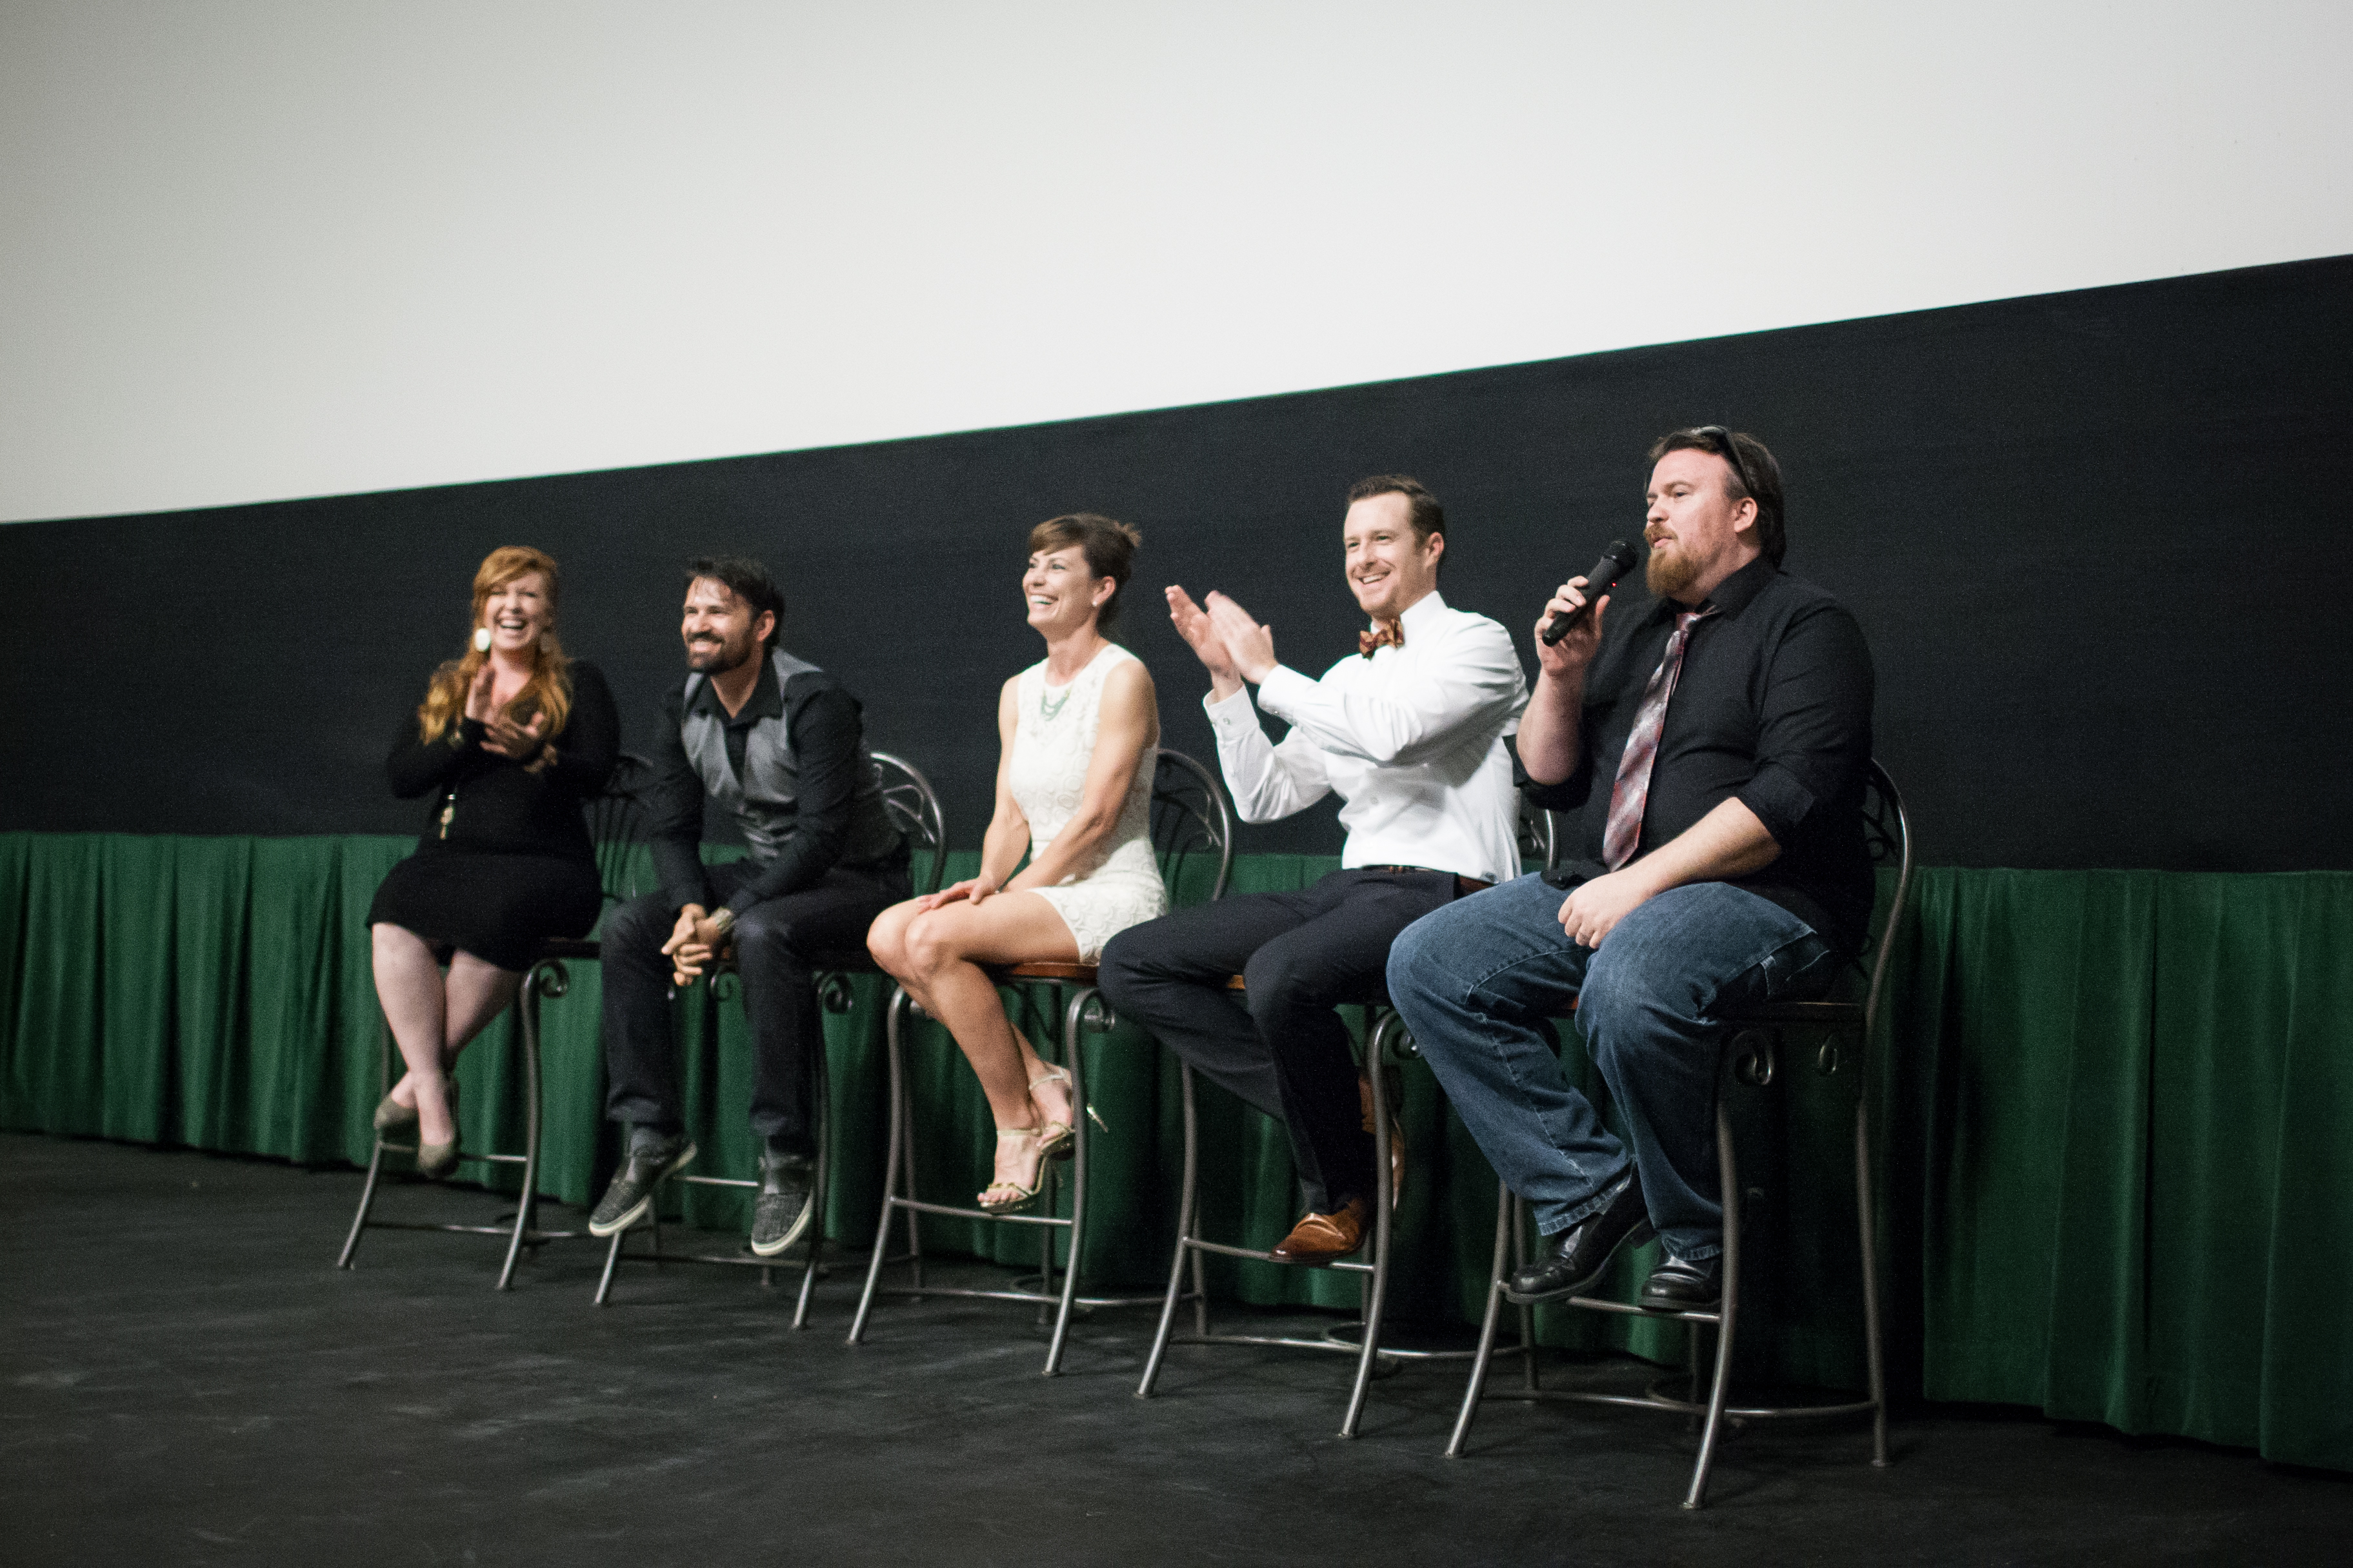 'Gordon Family Tree' QnA with a VERY PREGNANT Executive Producer/Lead Actress Jennica Schwartzman, Lead Actor Ryan Schwartzman, Actress Cassie Self, Actor Brace Harris, & Director Marc Hampson